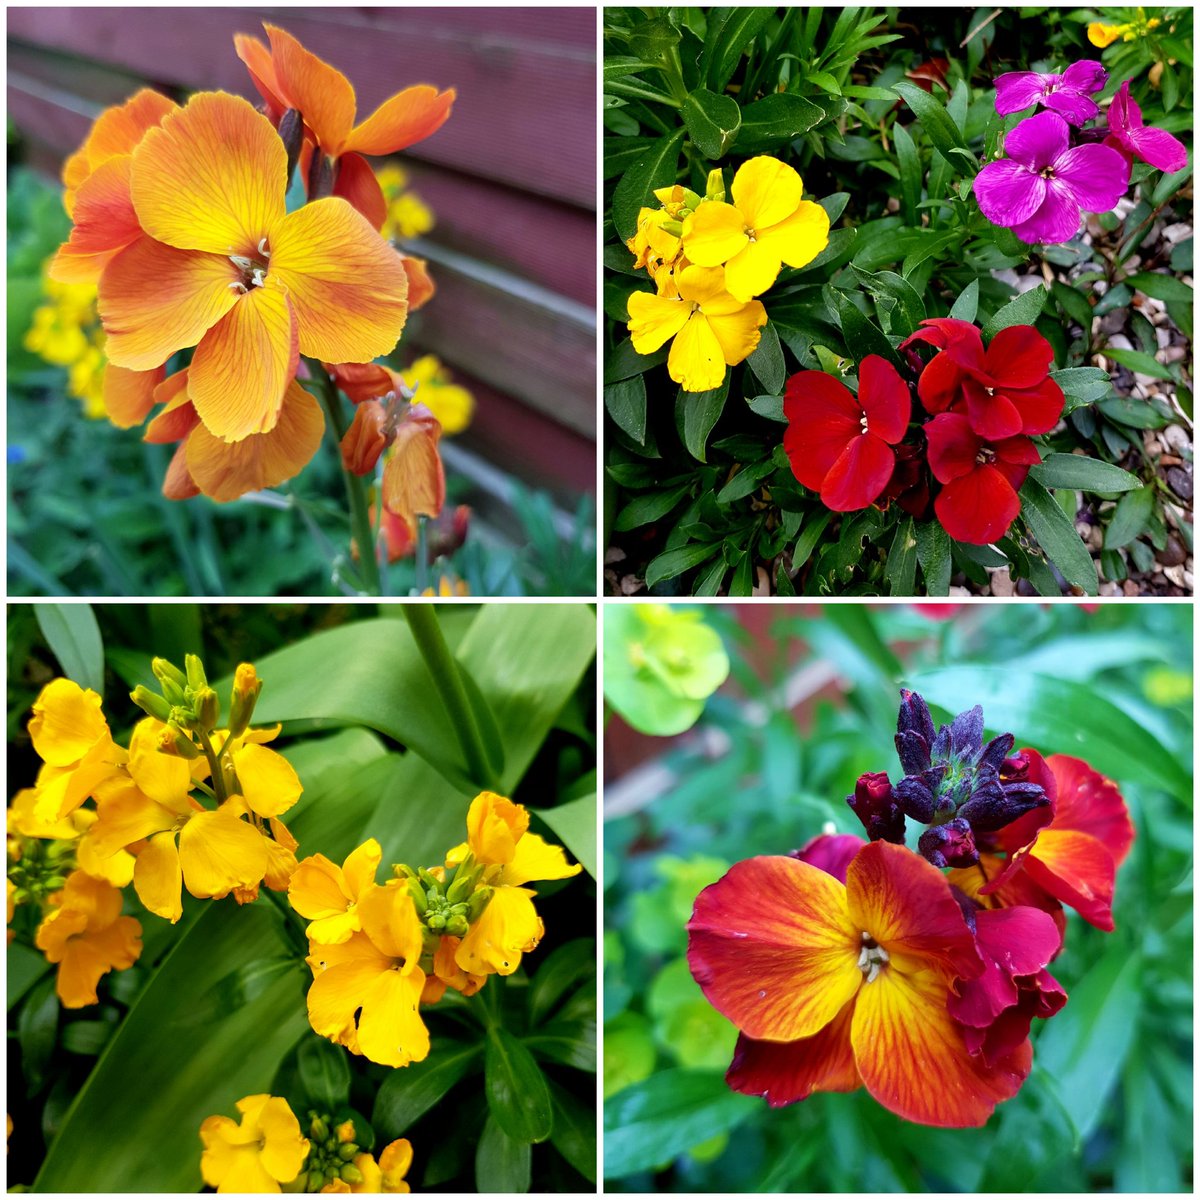 When I was young Wallflowers were the pride of many front gardens in the spring, I still love them.